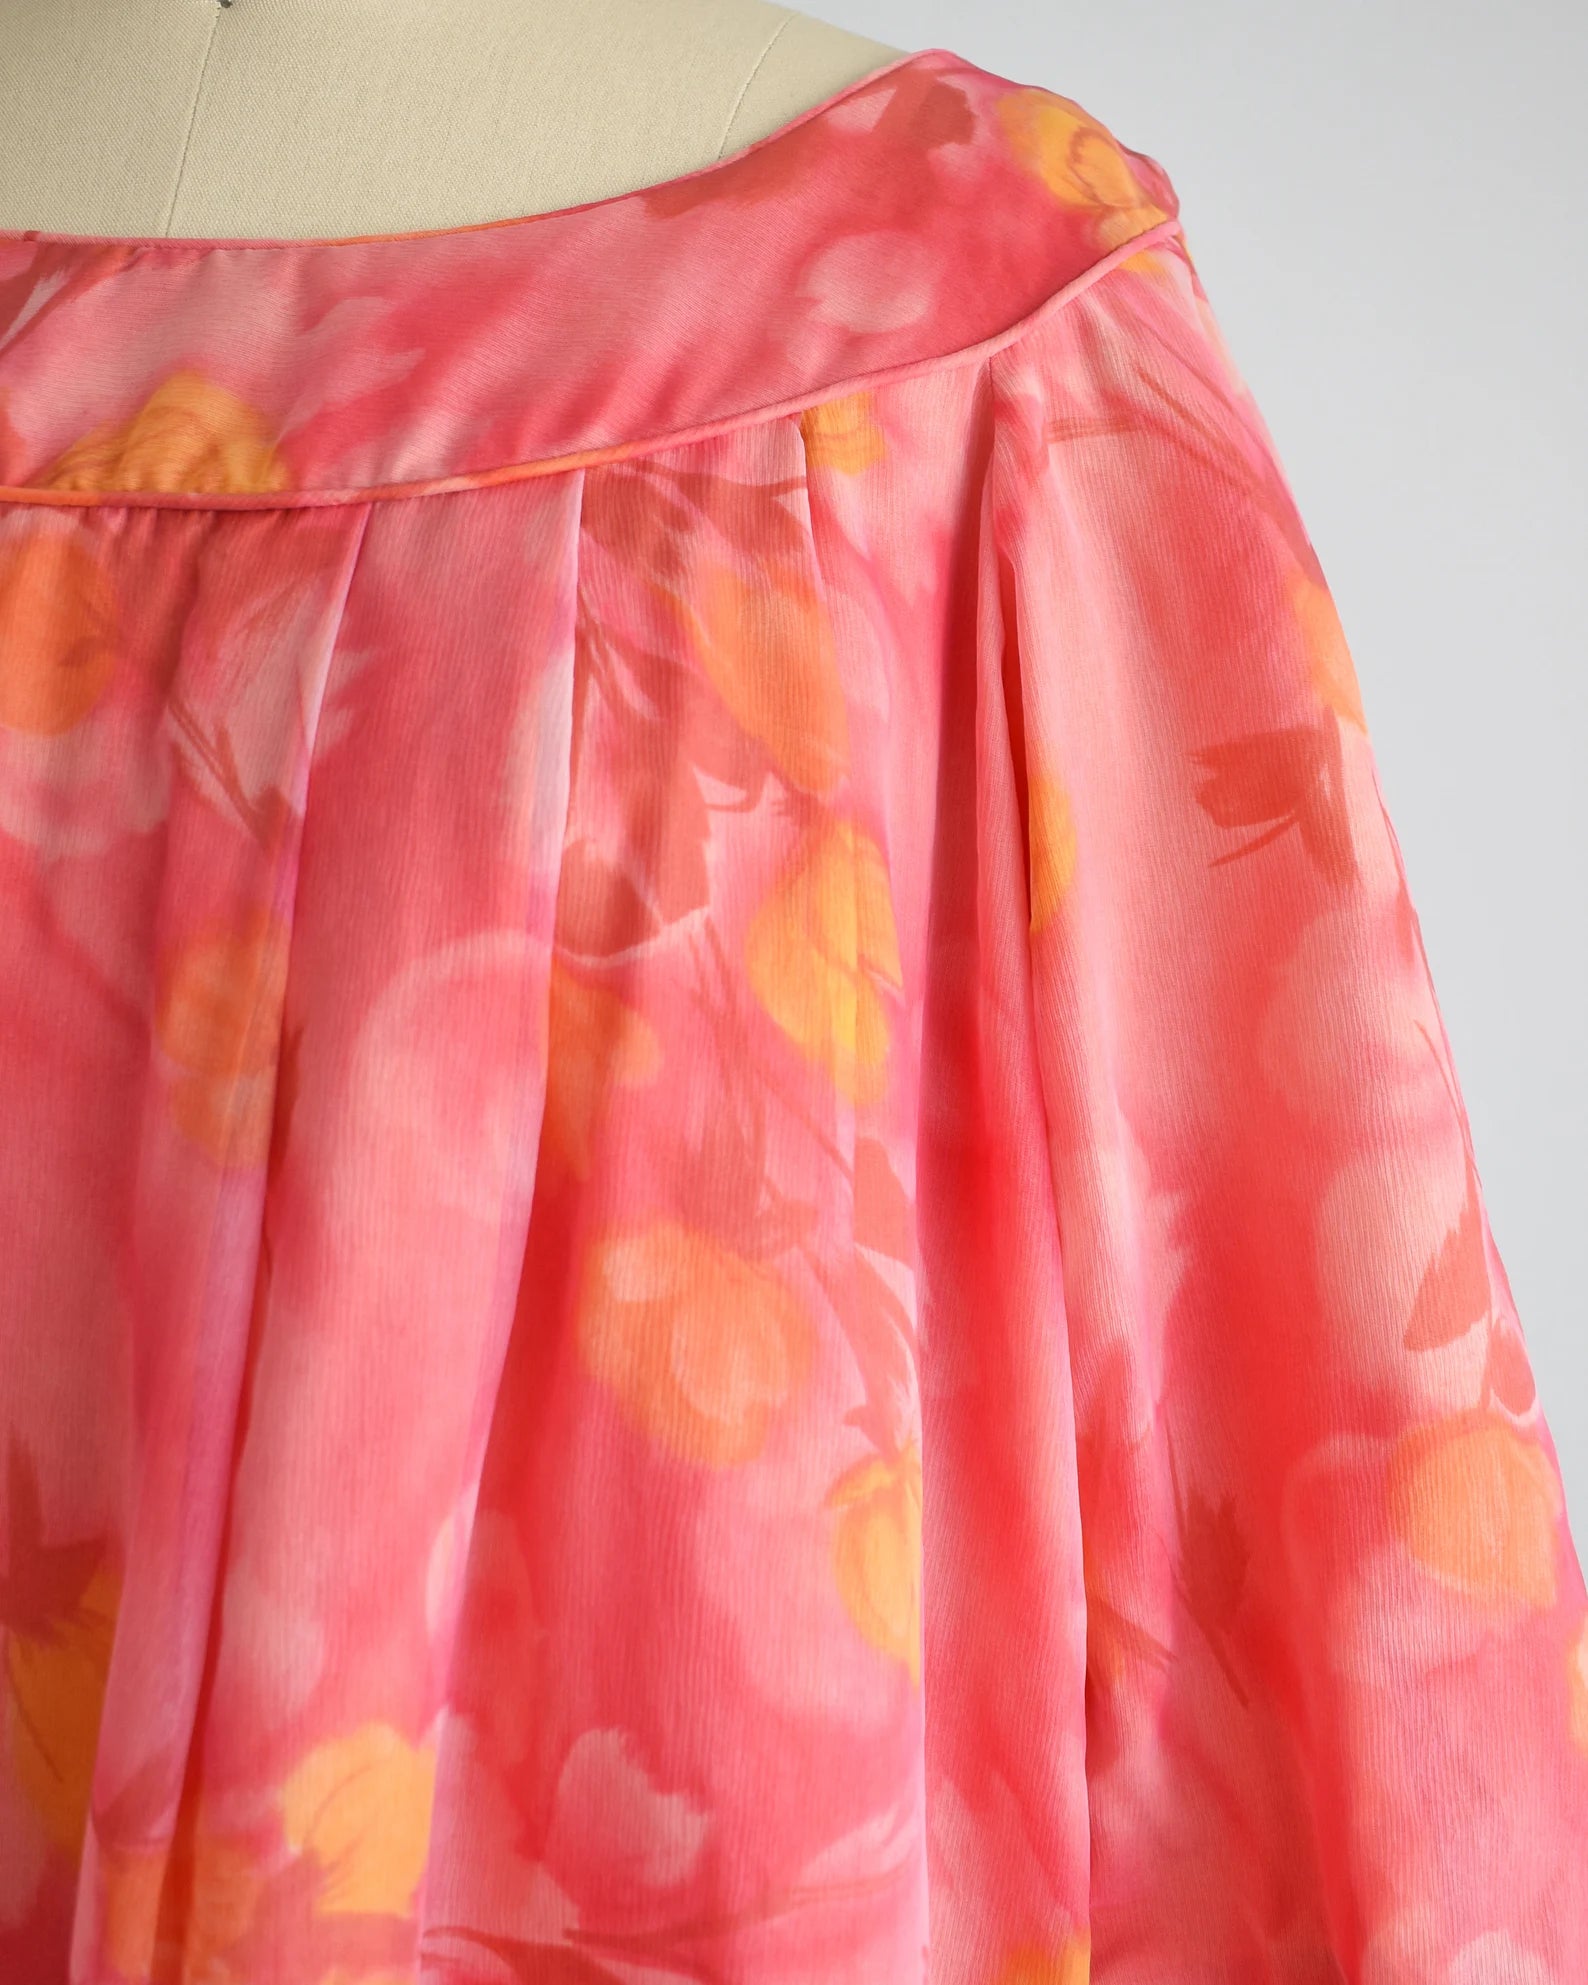 Close up of floral print, which is in yellow, pinks, orange, and dark red.